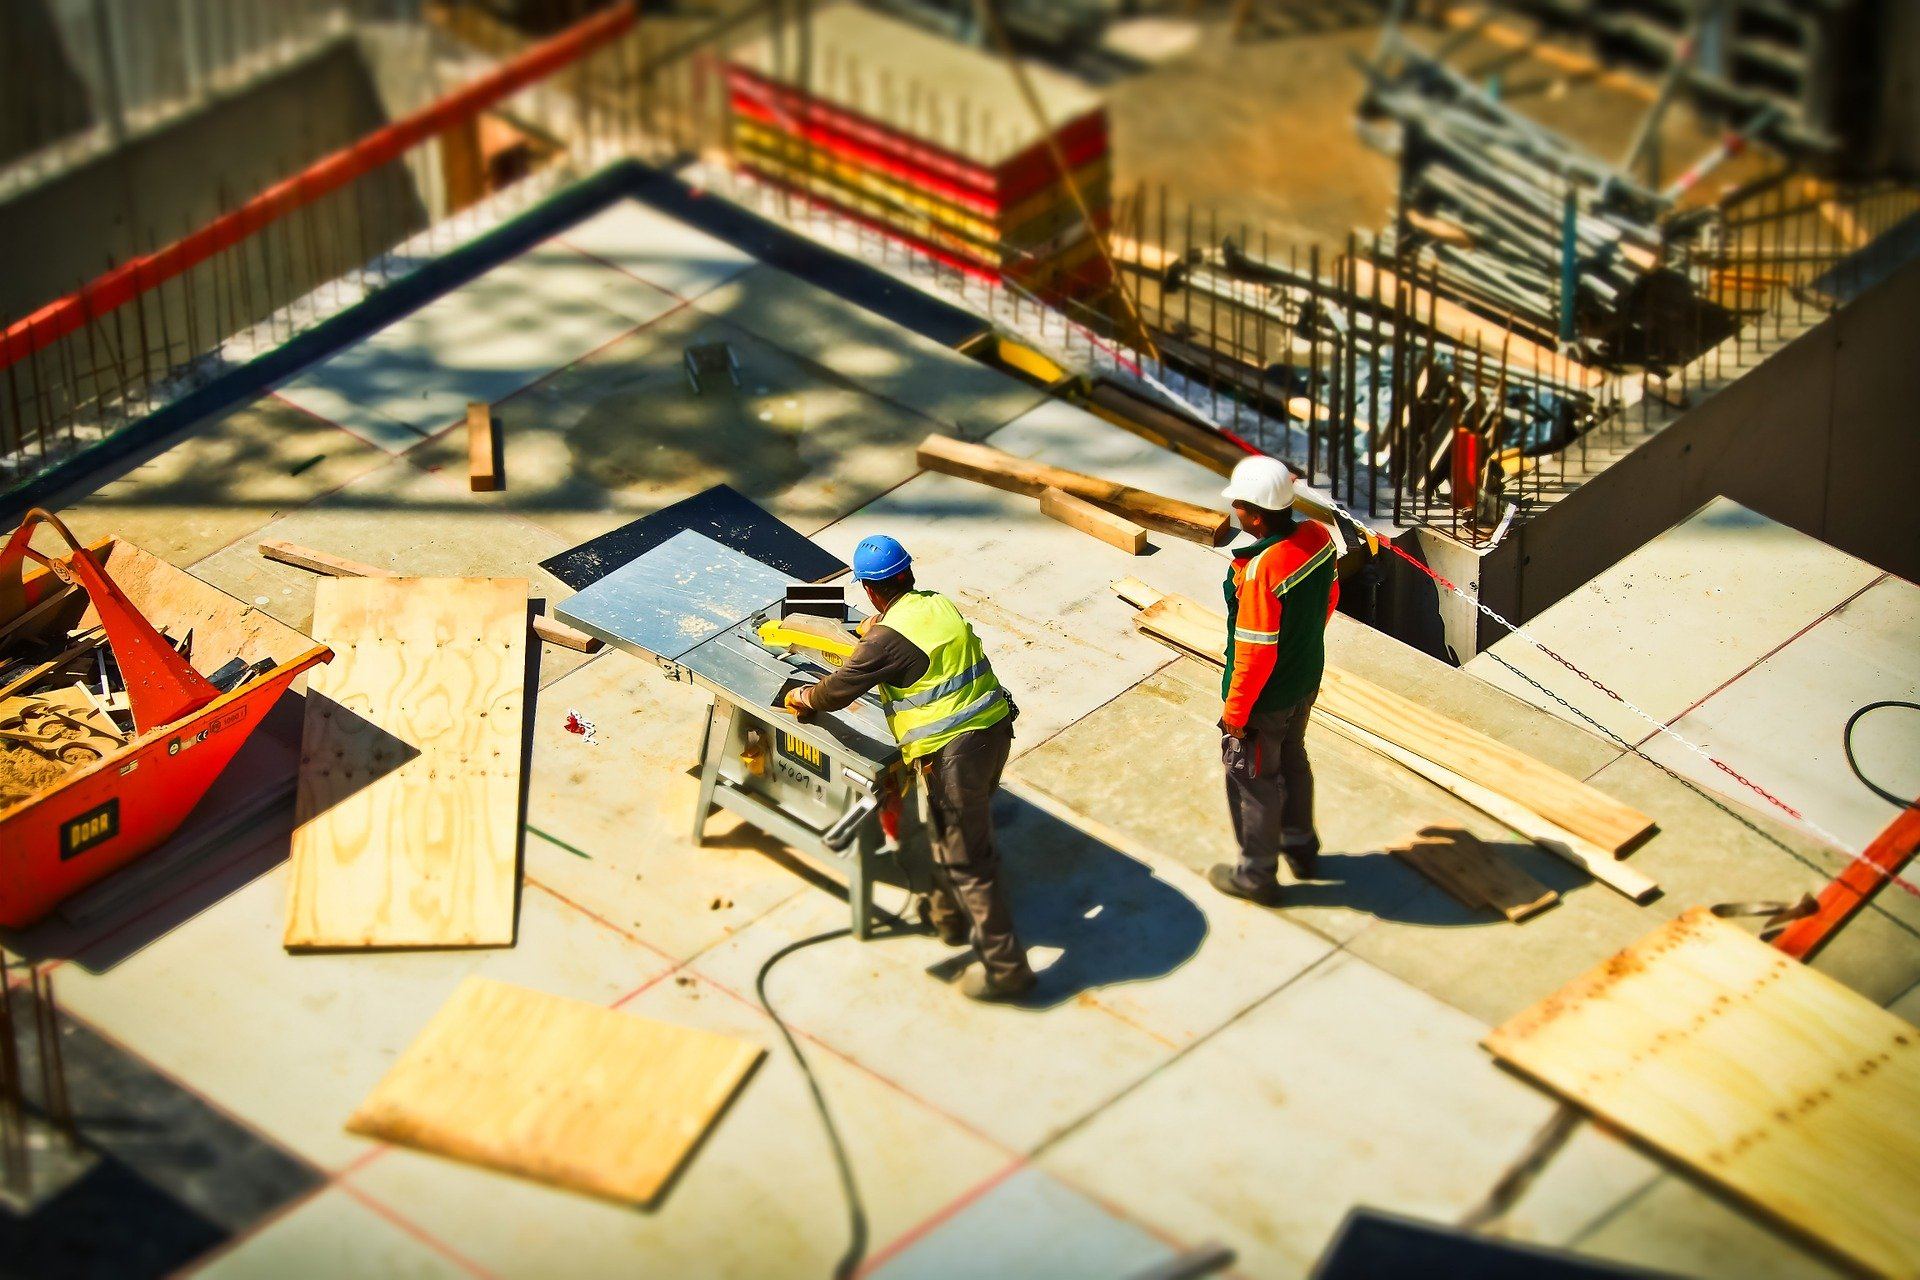 Top 10 safety risks in construction